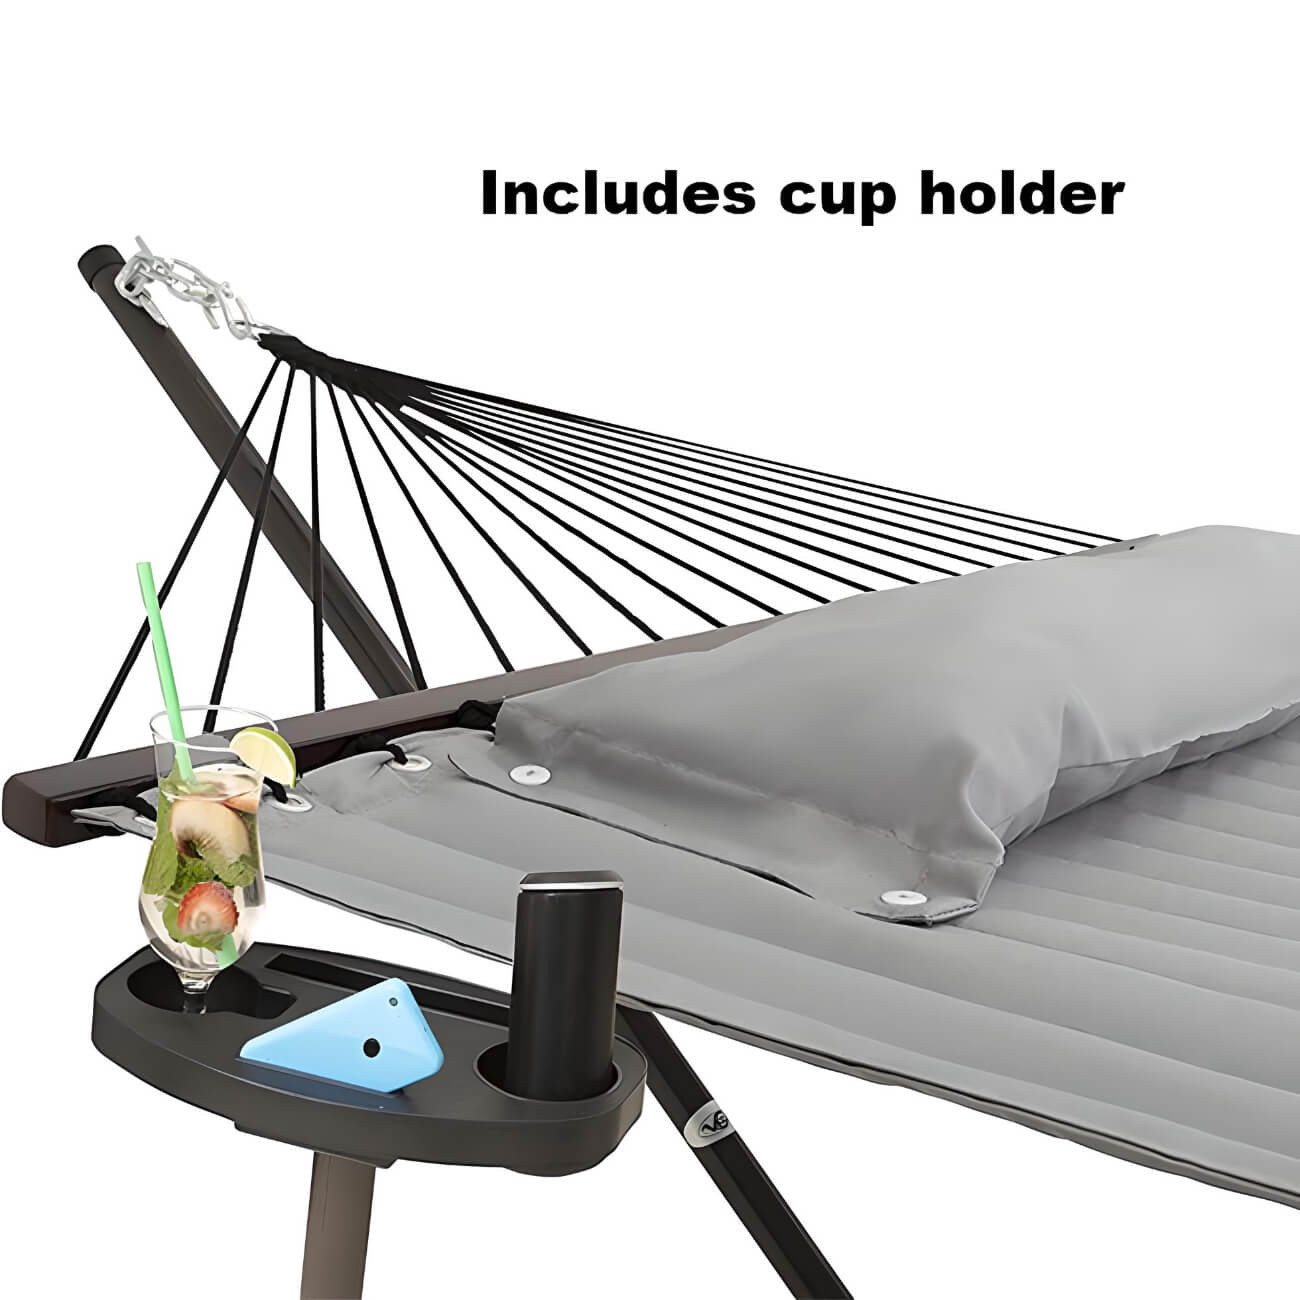 showing-the-cup-holder-of-double-outdoor-hammock-with-stand